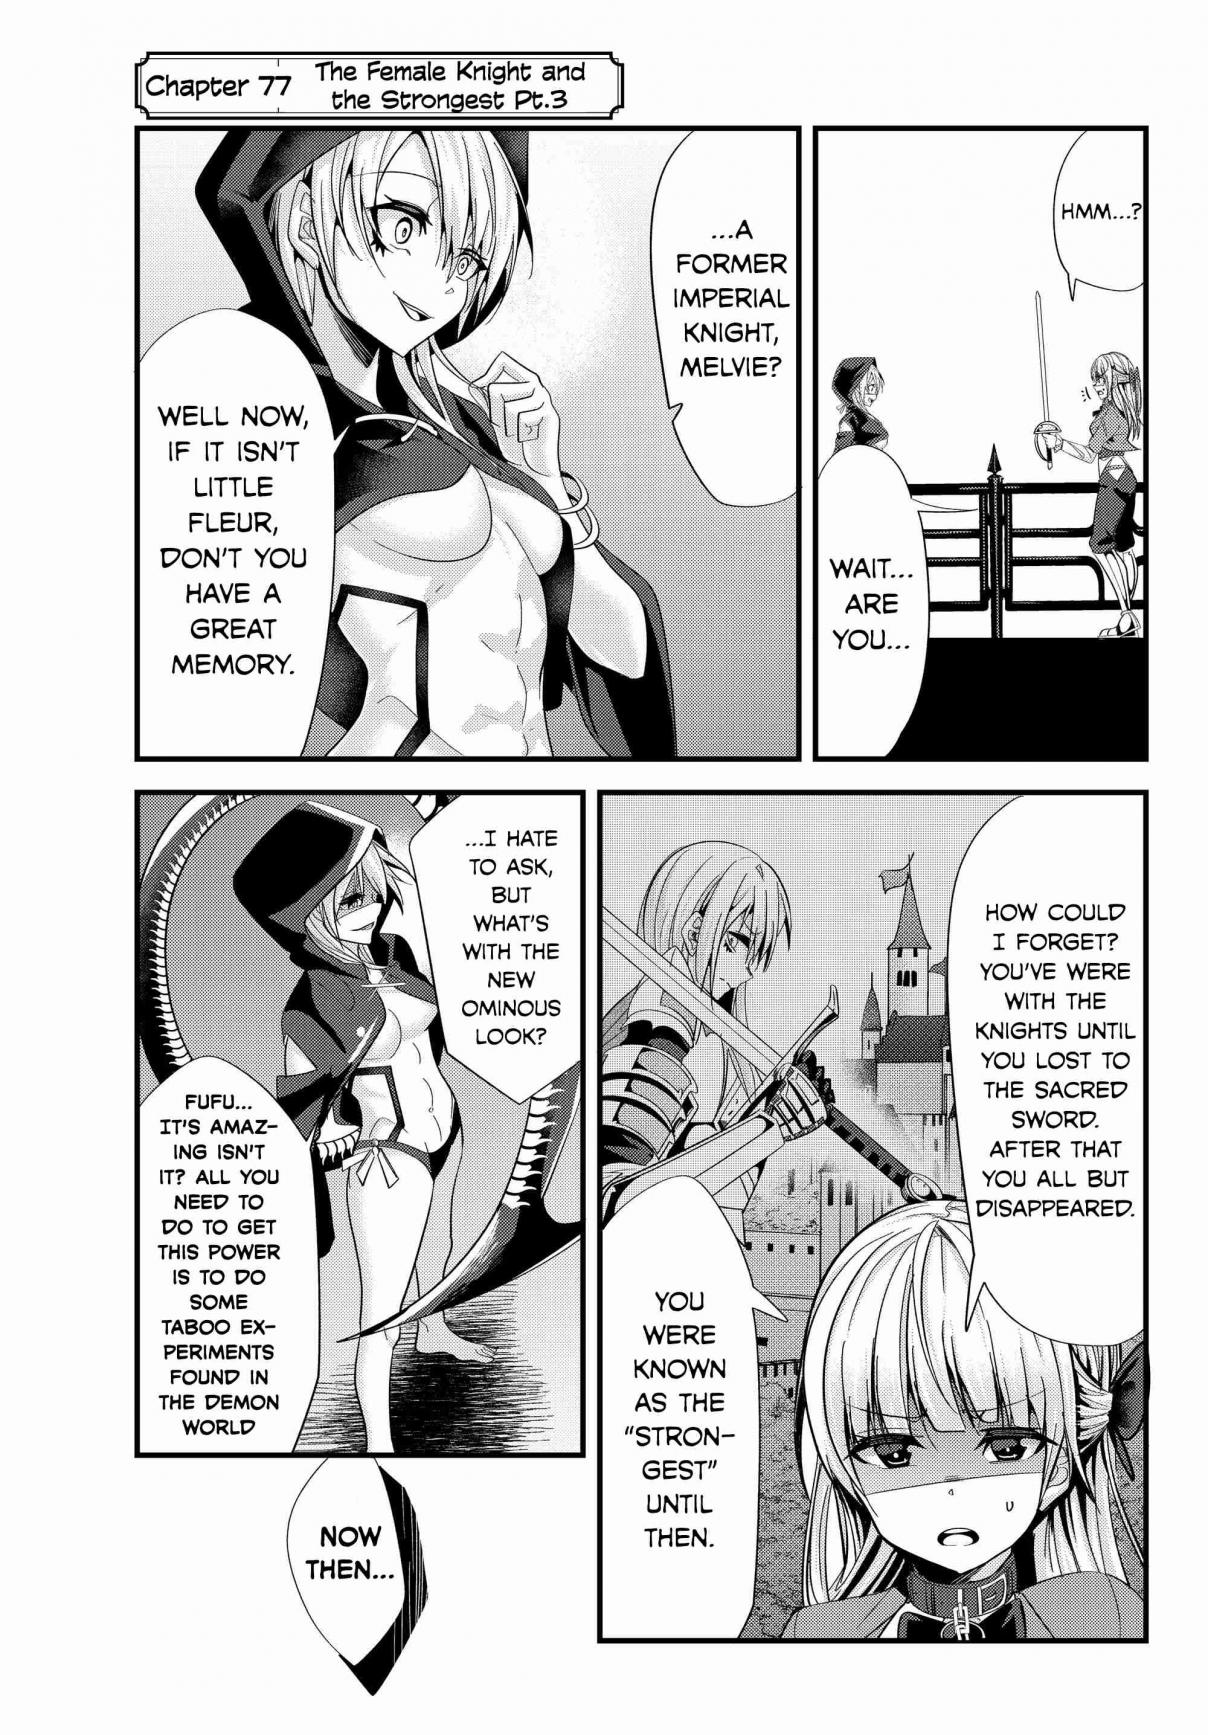 A Story About Treating a Female Knight, Who Has Never Been Treated as a Woman, as a Woman Ch. 77 The Female Knight and the Strongest Pt.3